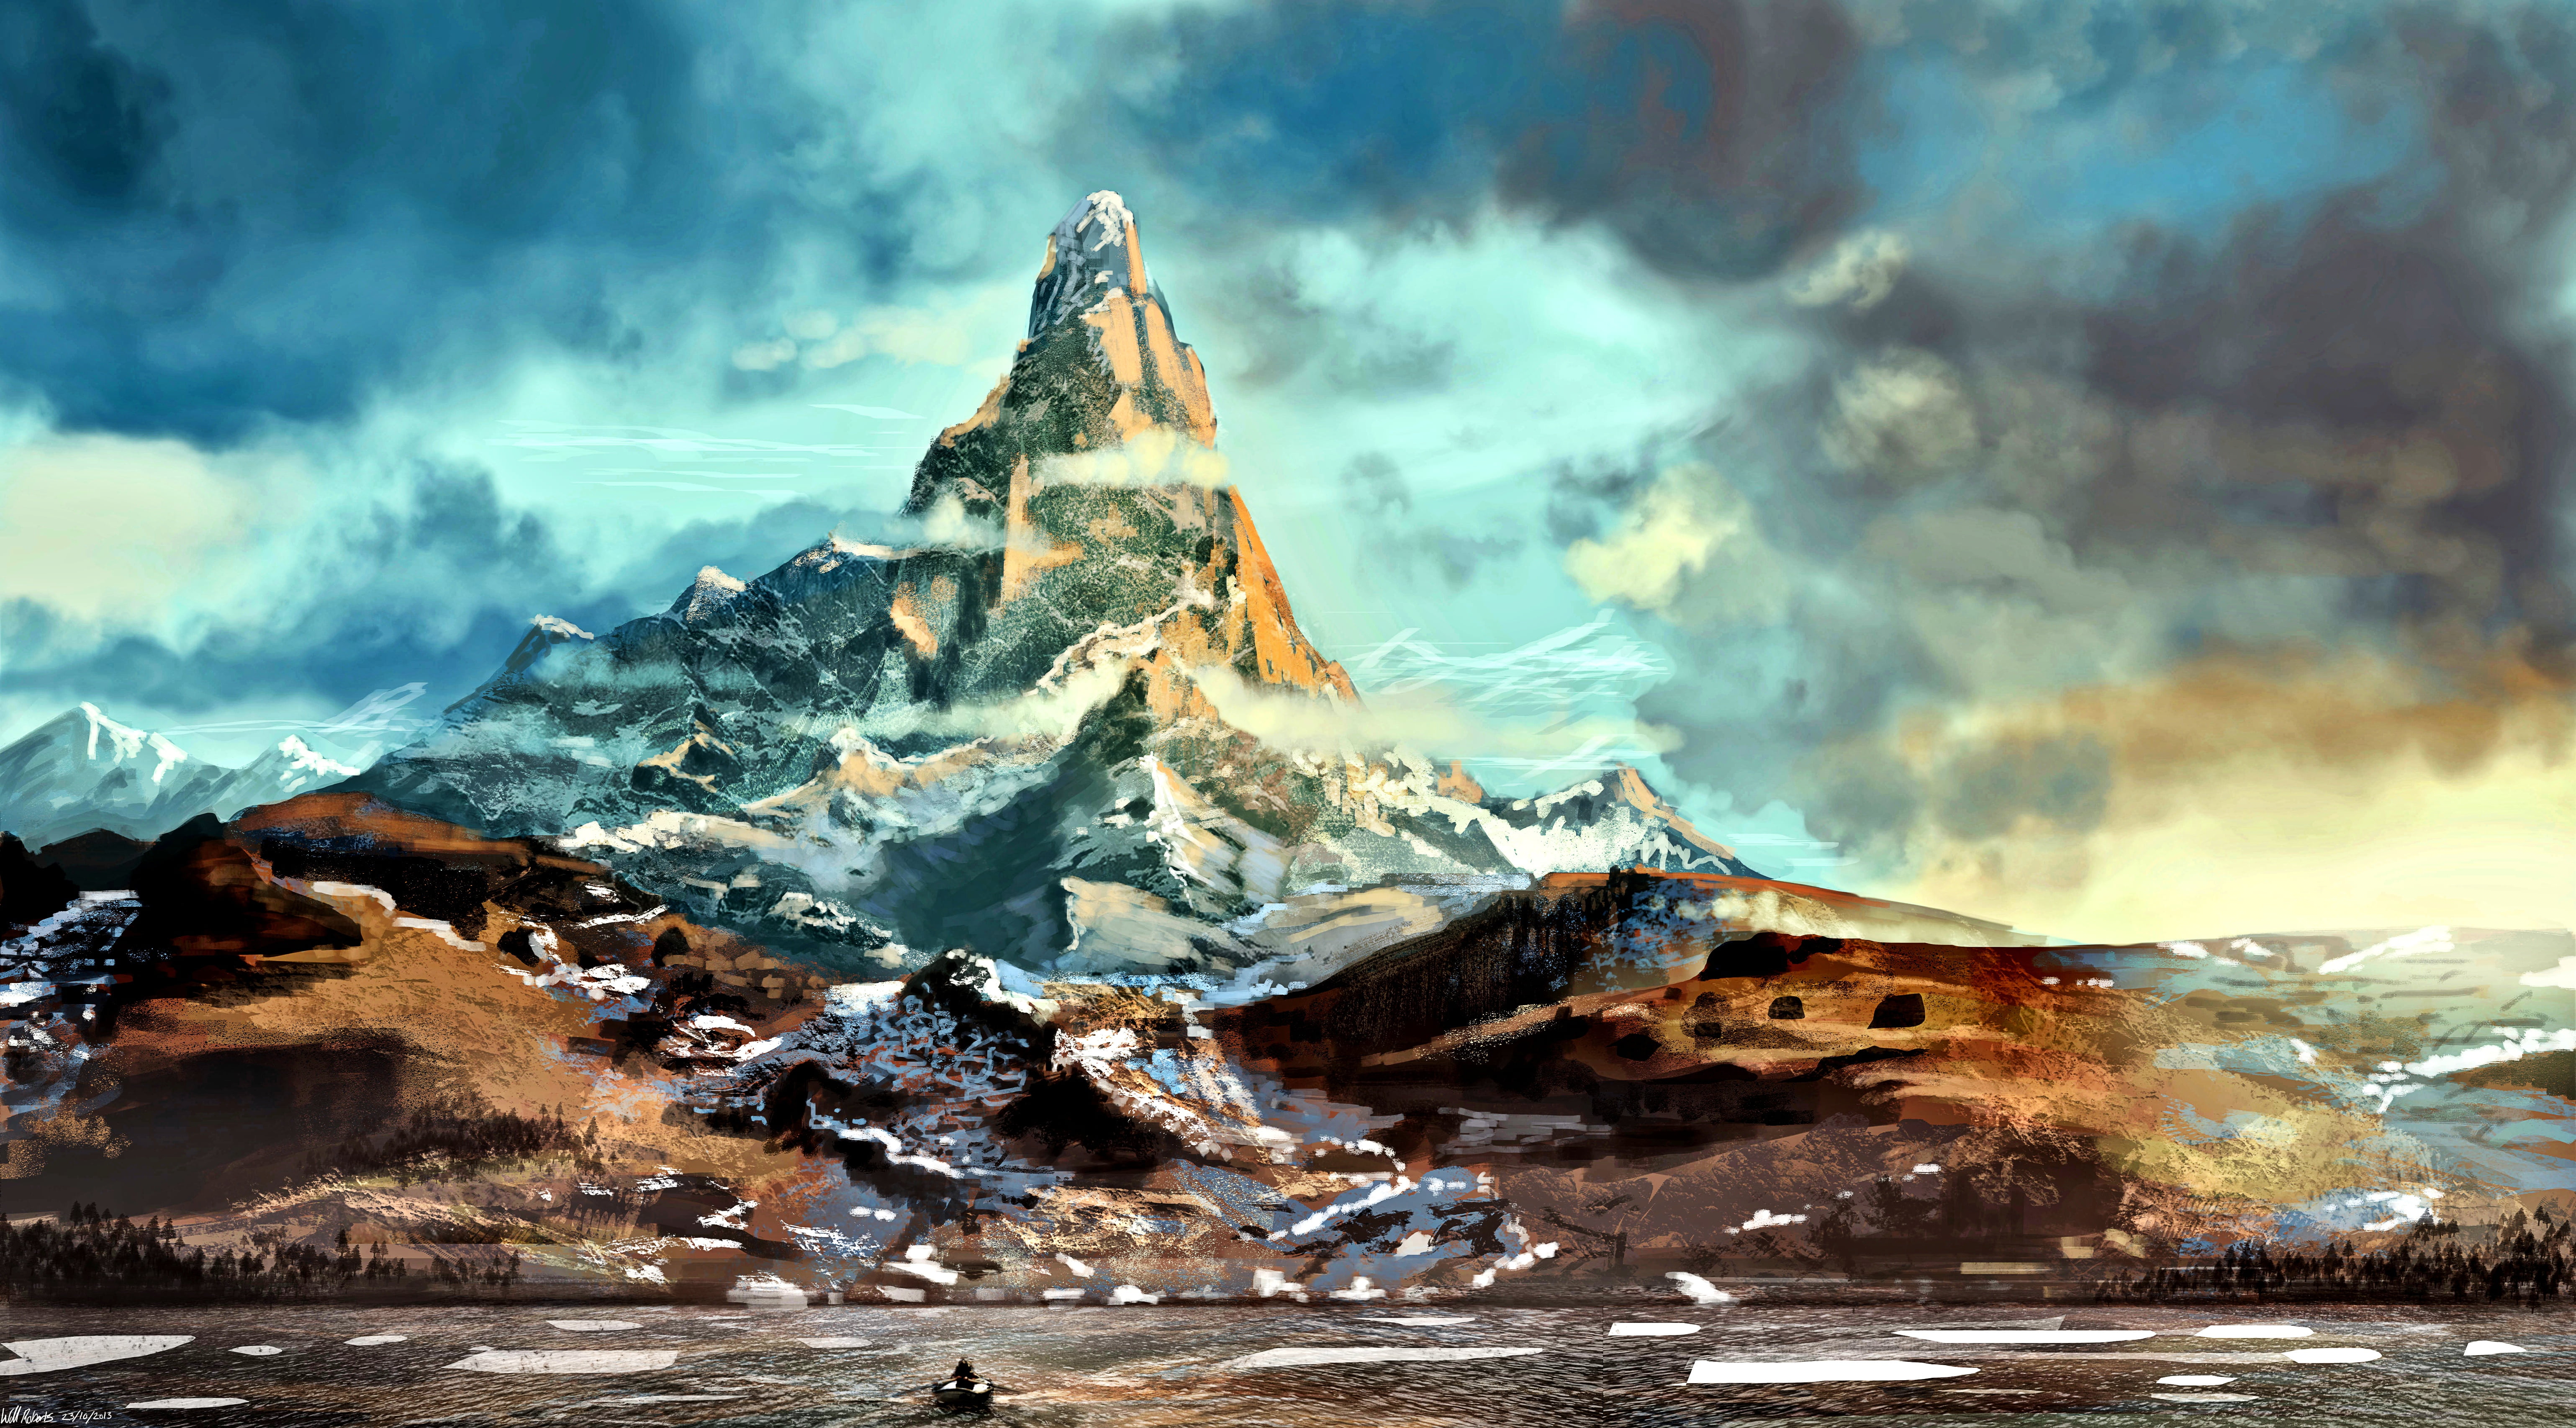 art, The Hobbit, Erebor, Middle earth, Lonely Mountain